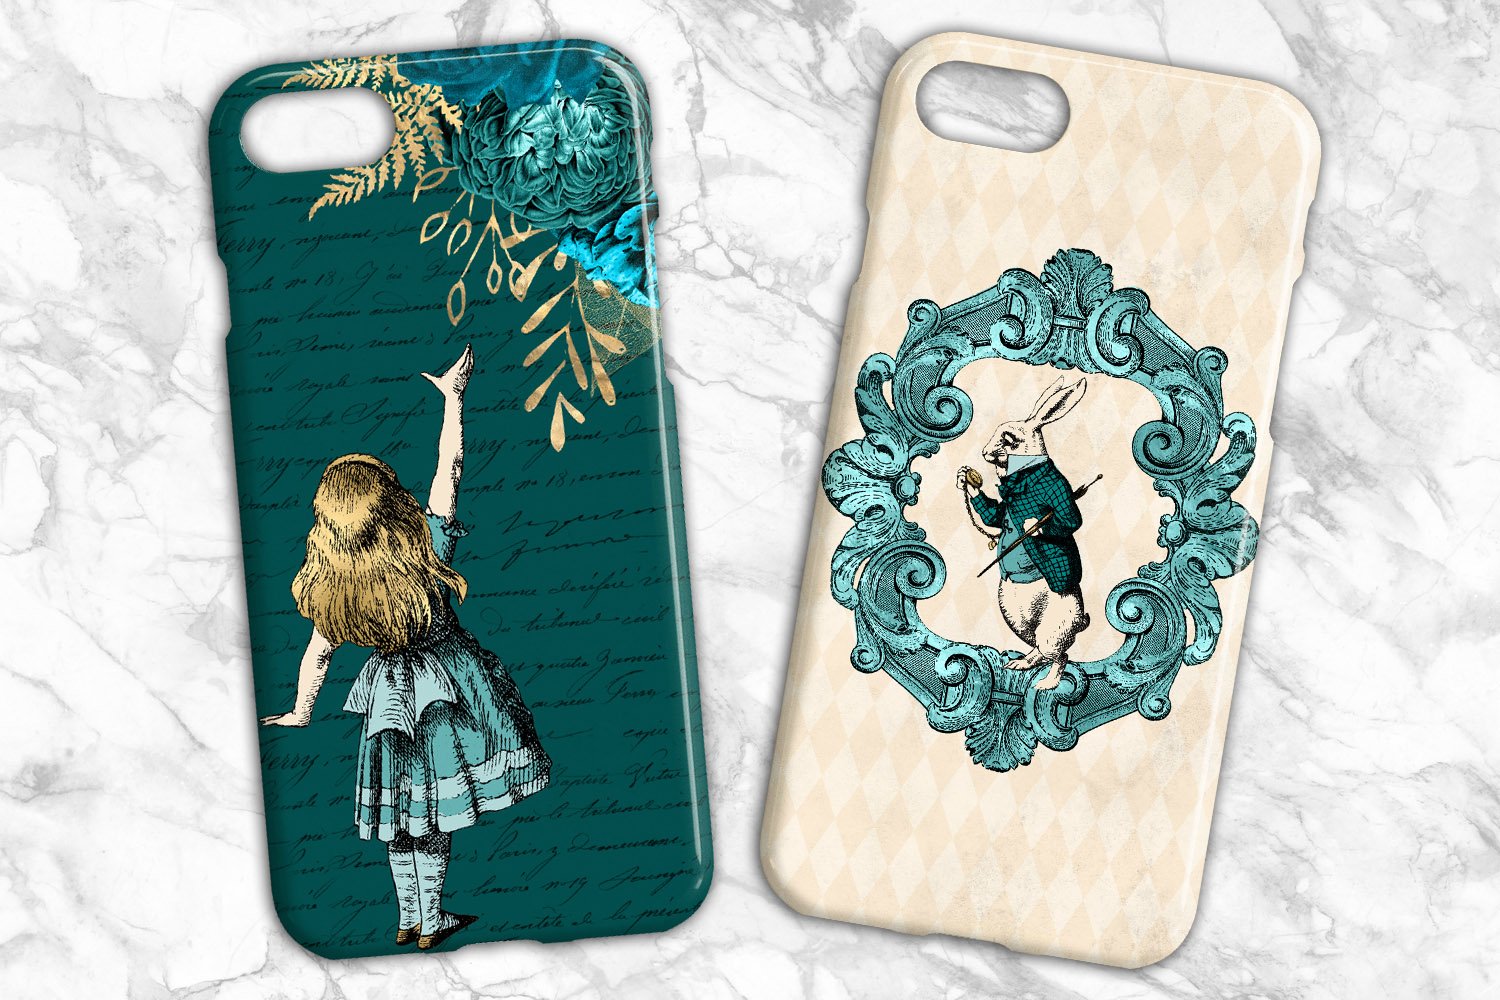 Covers with charms for the phone.